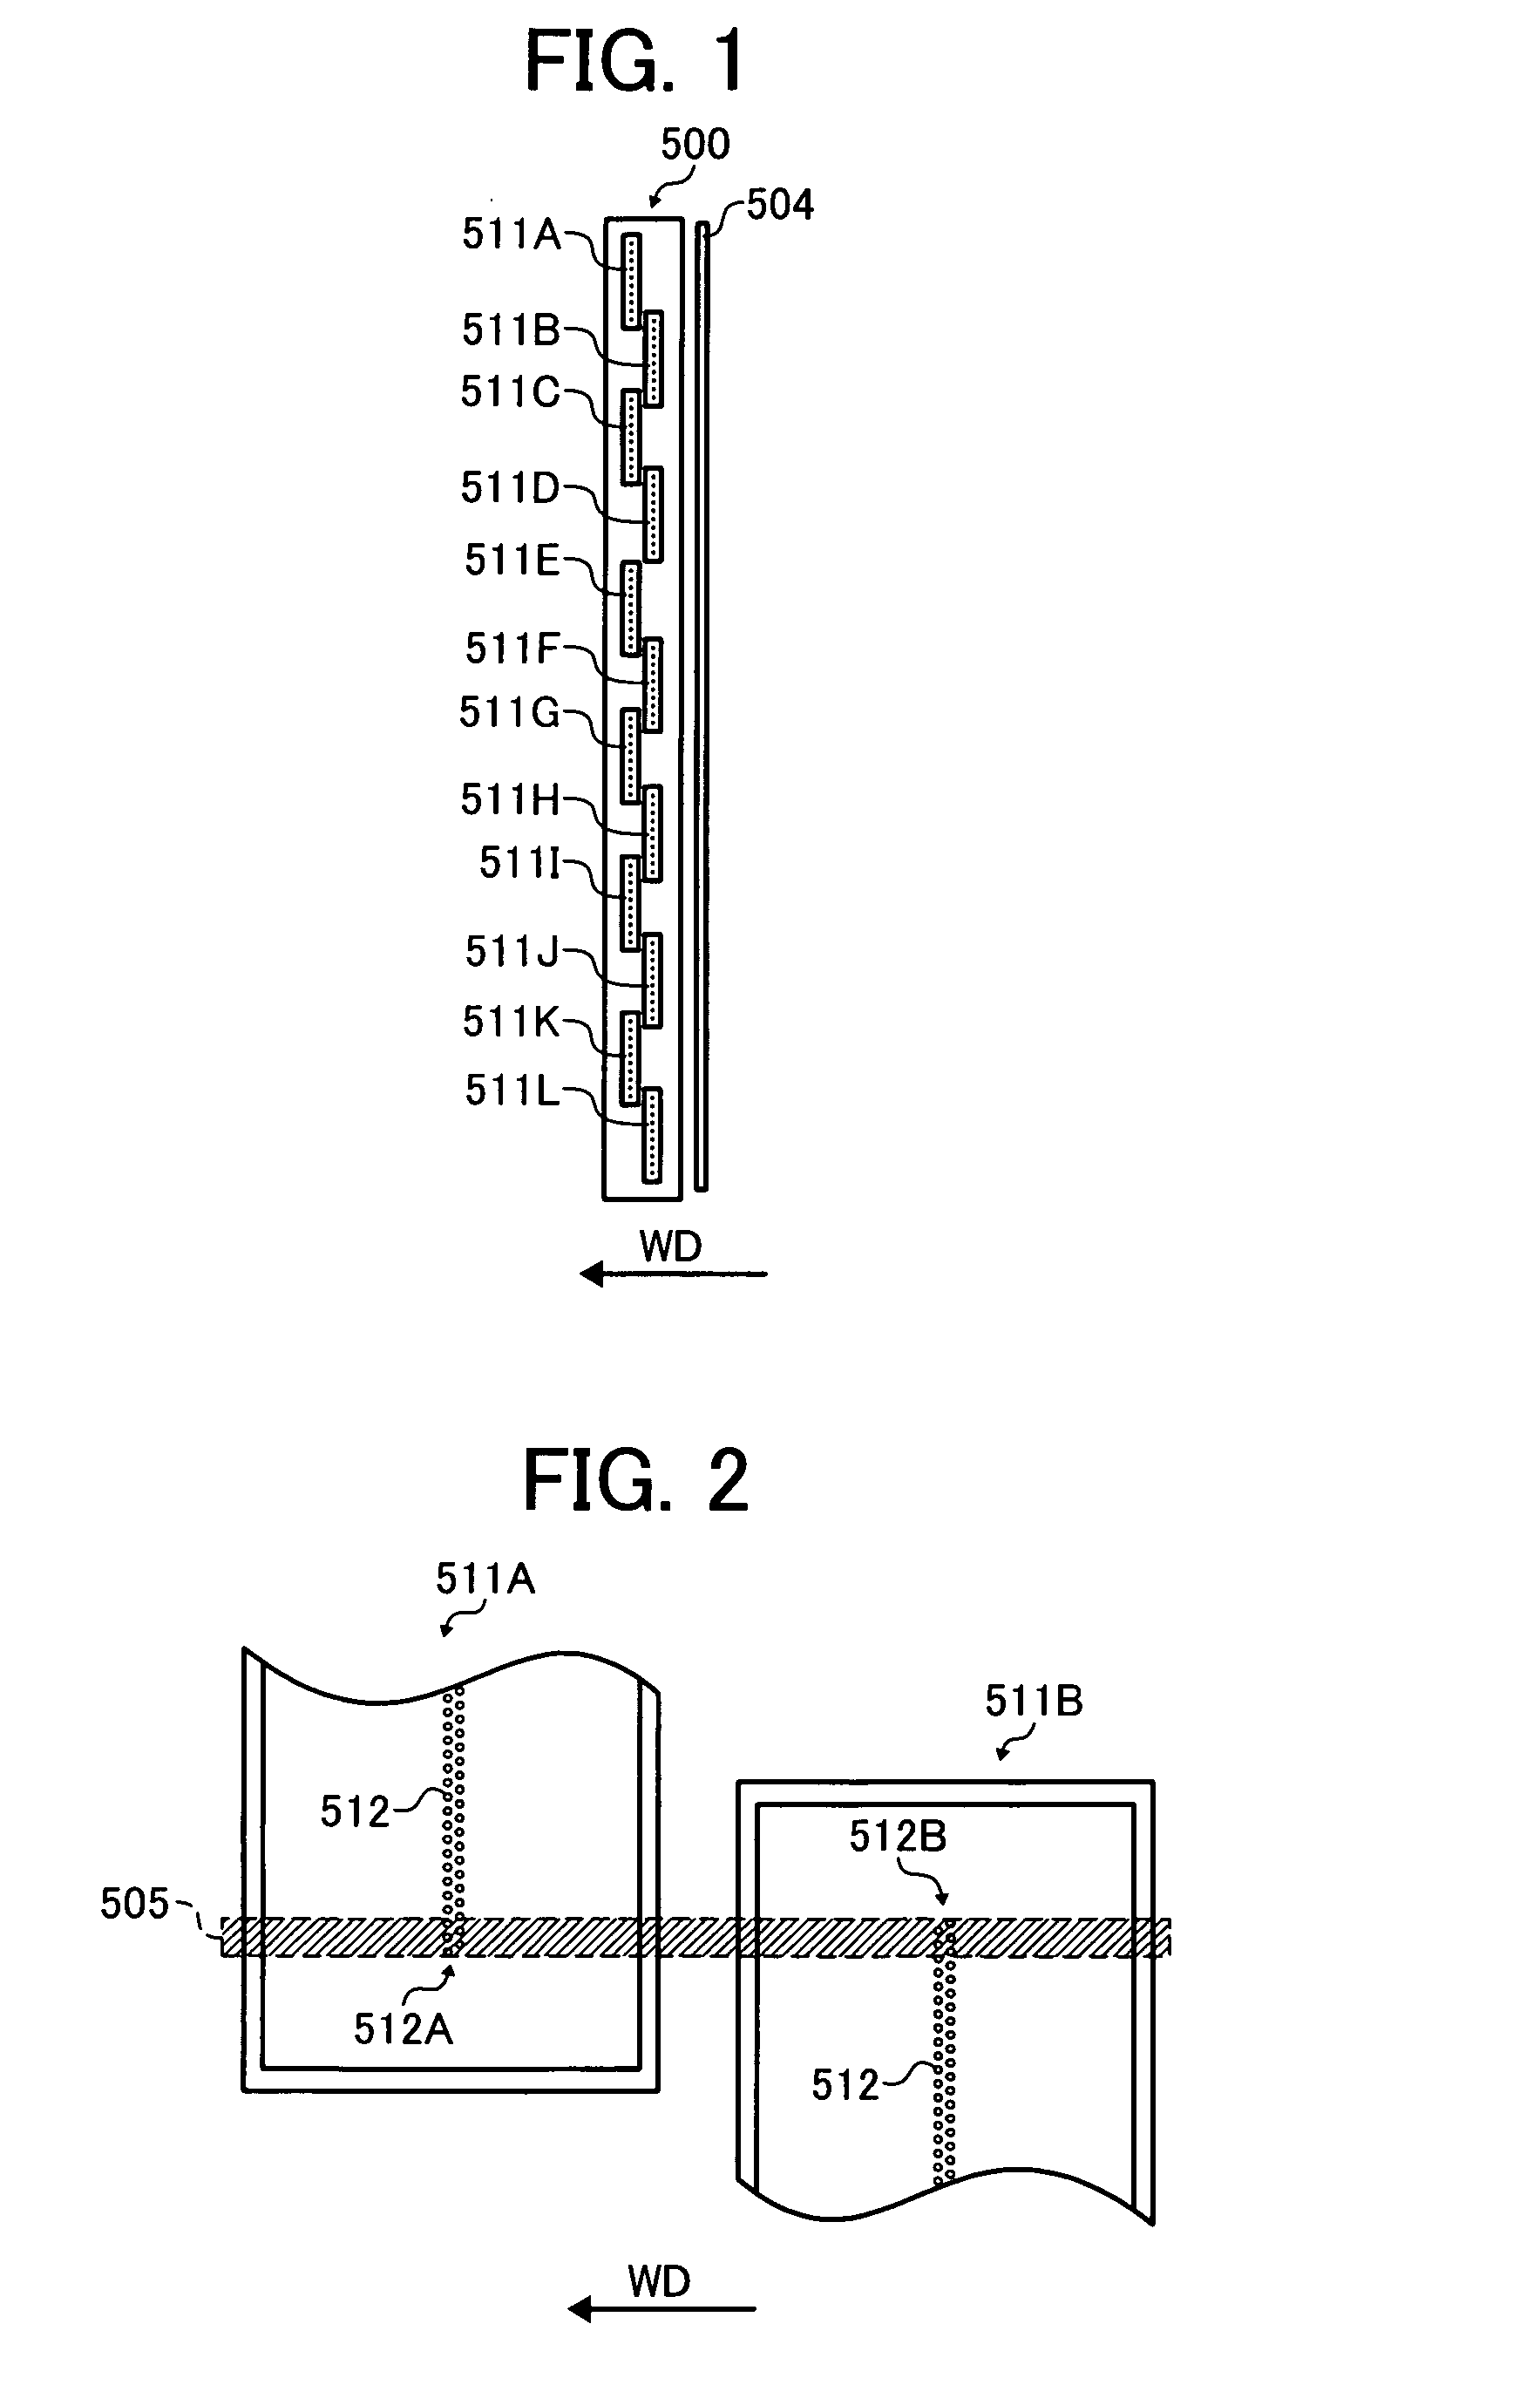 Image forming apparatus having a plurality of liquid discharge heads